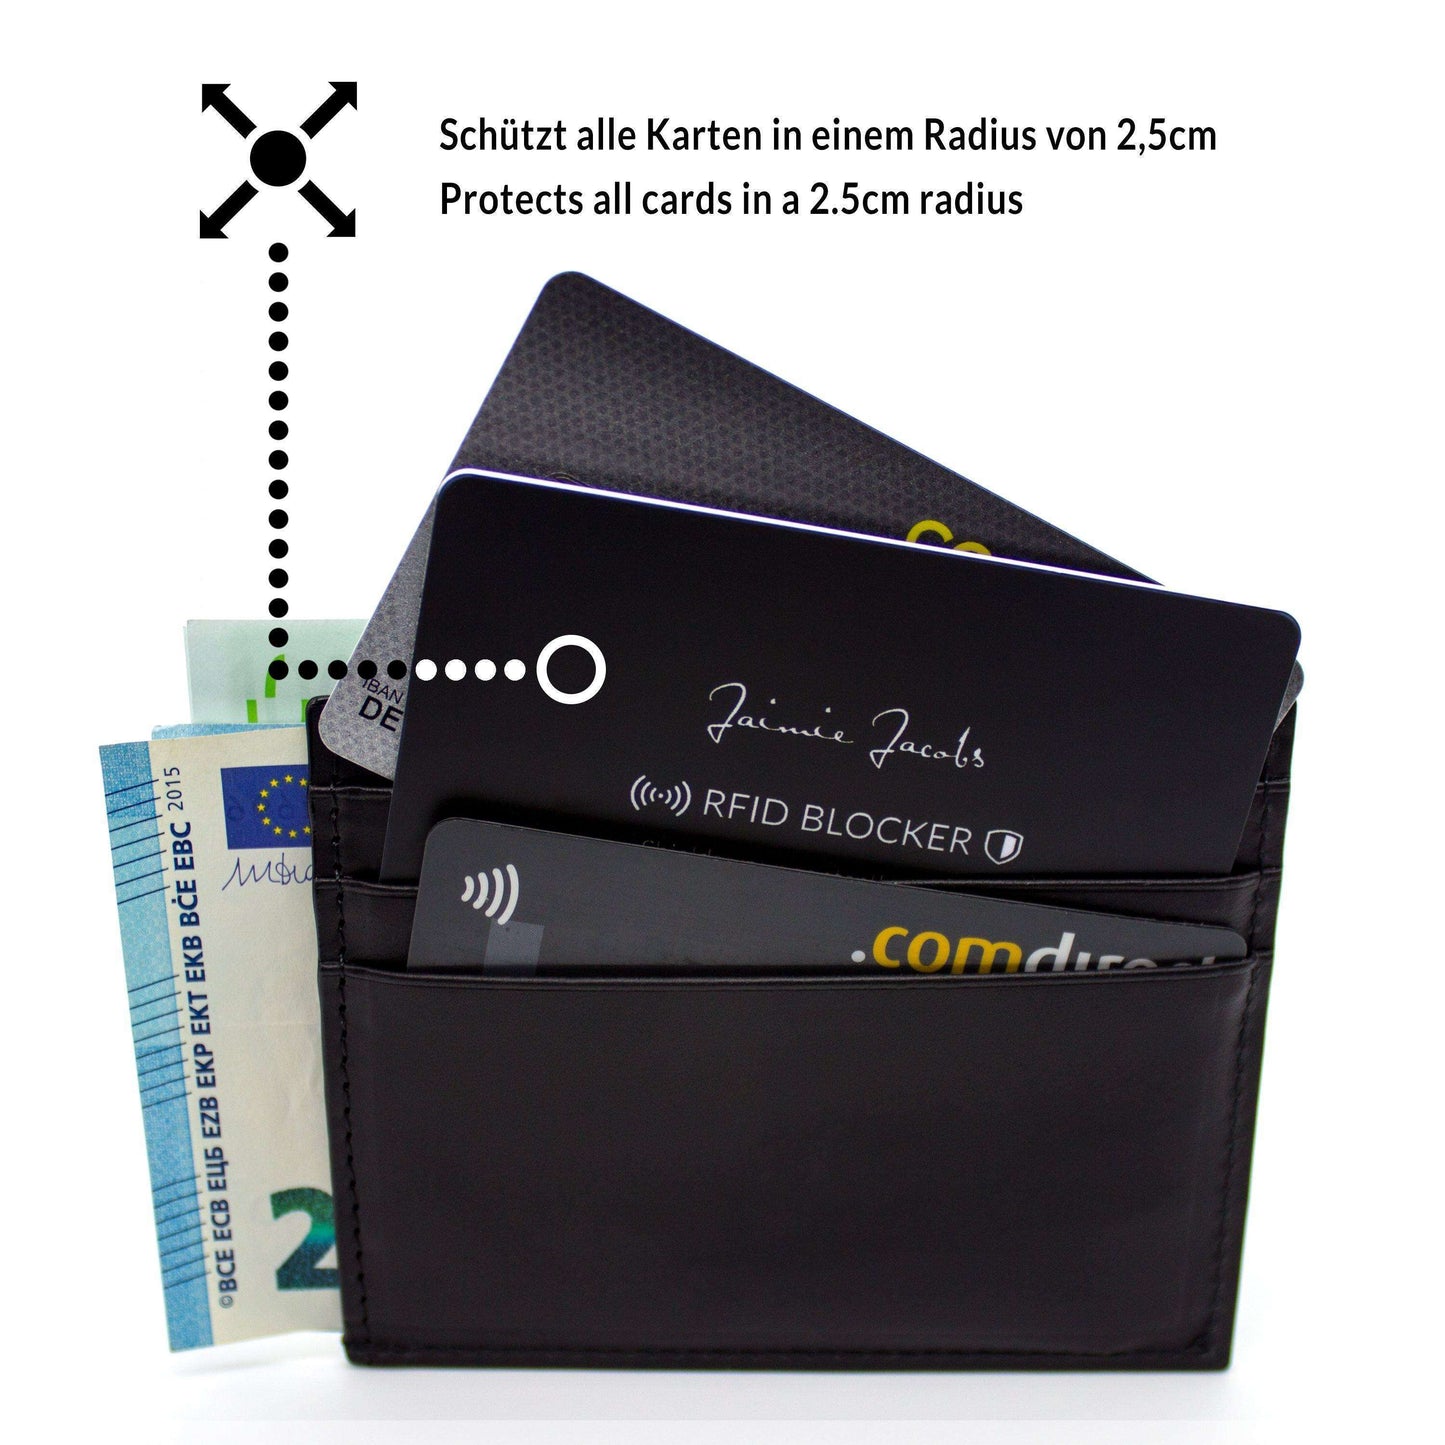 RFID protection card for RFID and NFC cards